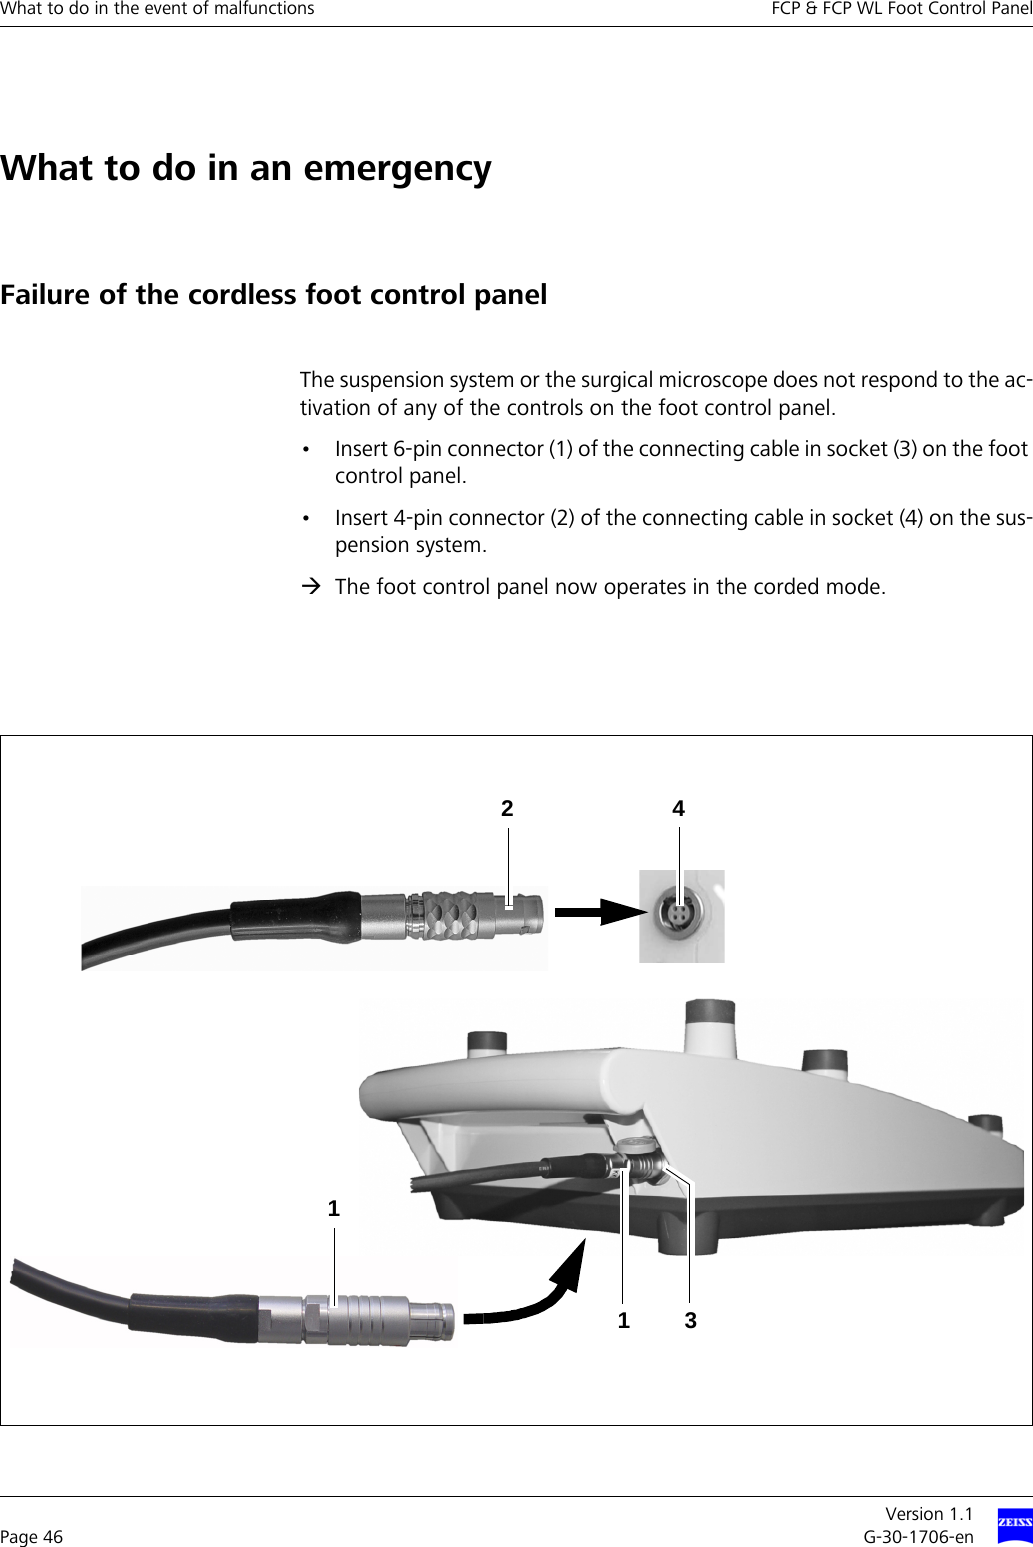 What to do in the event of malfunctions FCP &amp; FCP WL Foot Control PanelVersion 1.1Page 46 G-30-1706-enWhat to do in an emergencyFailure of the cordless foot control panelThe suspension system or the surgical microscope does not respond to the ac-tivation of any of the controls on the foot control panel. • Insert 6-pin connector (1) of the connecting cable in socket (3) on the foot control panel.• Insert 4-pin connector (2) of the connecting cable in socket (4) on the sus-pension system. ÆThe foot control panel now operates in the corded mode.13214